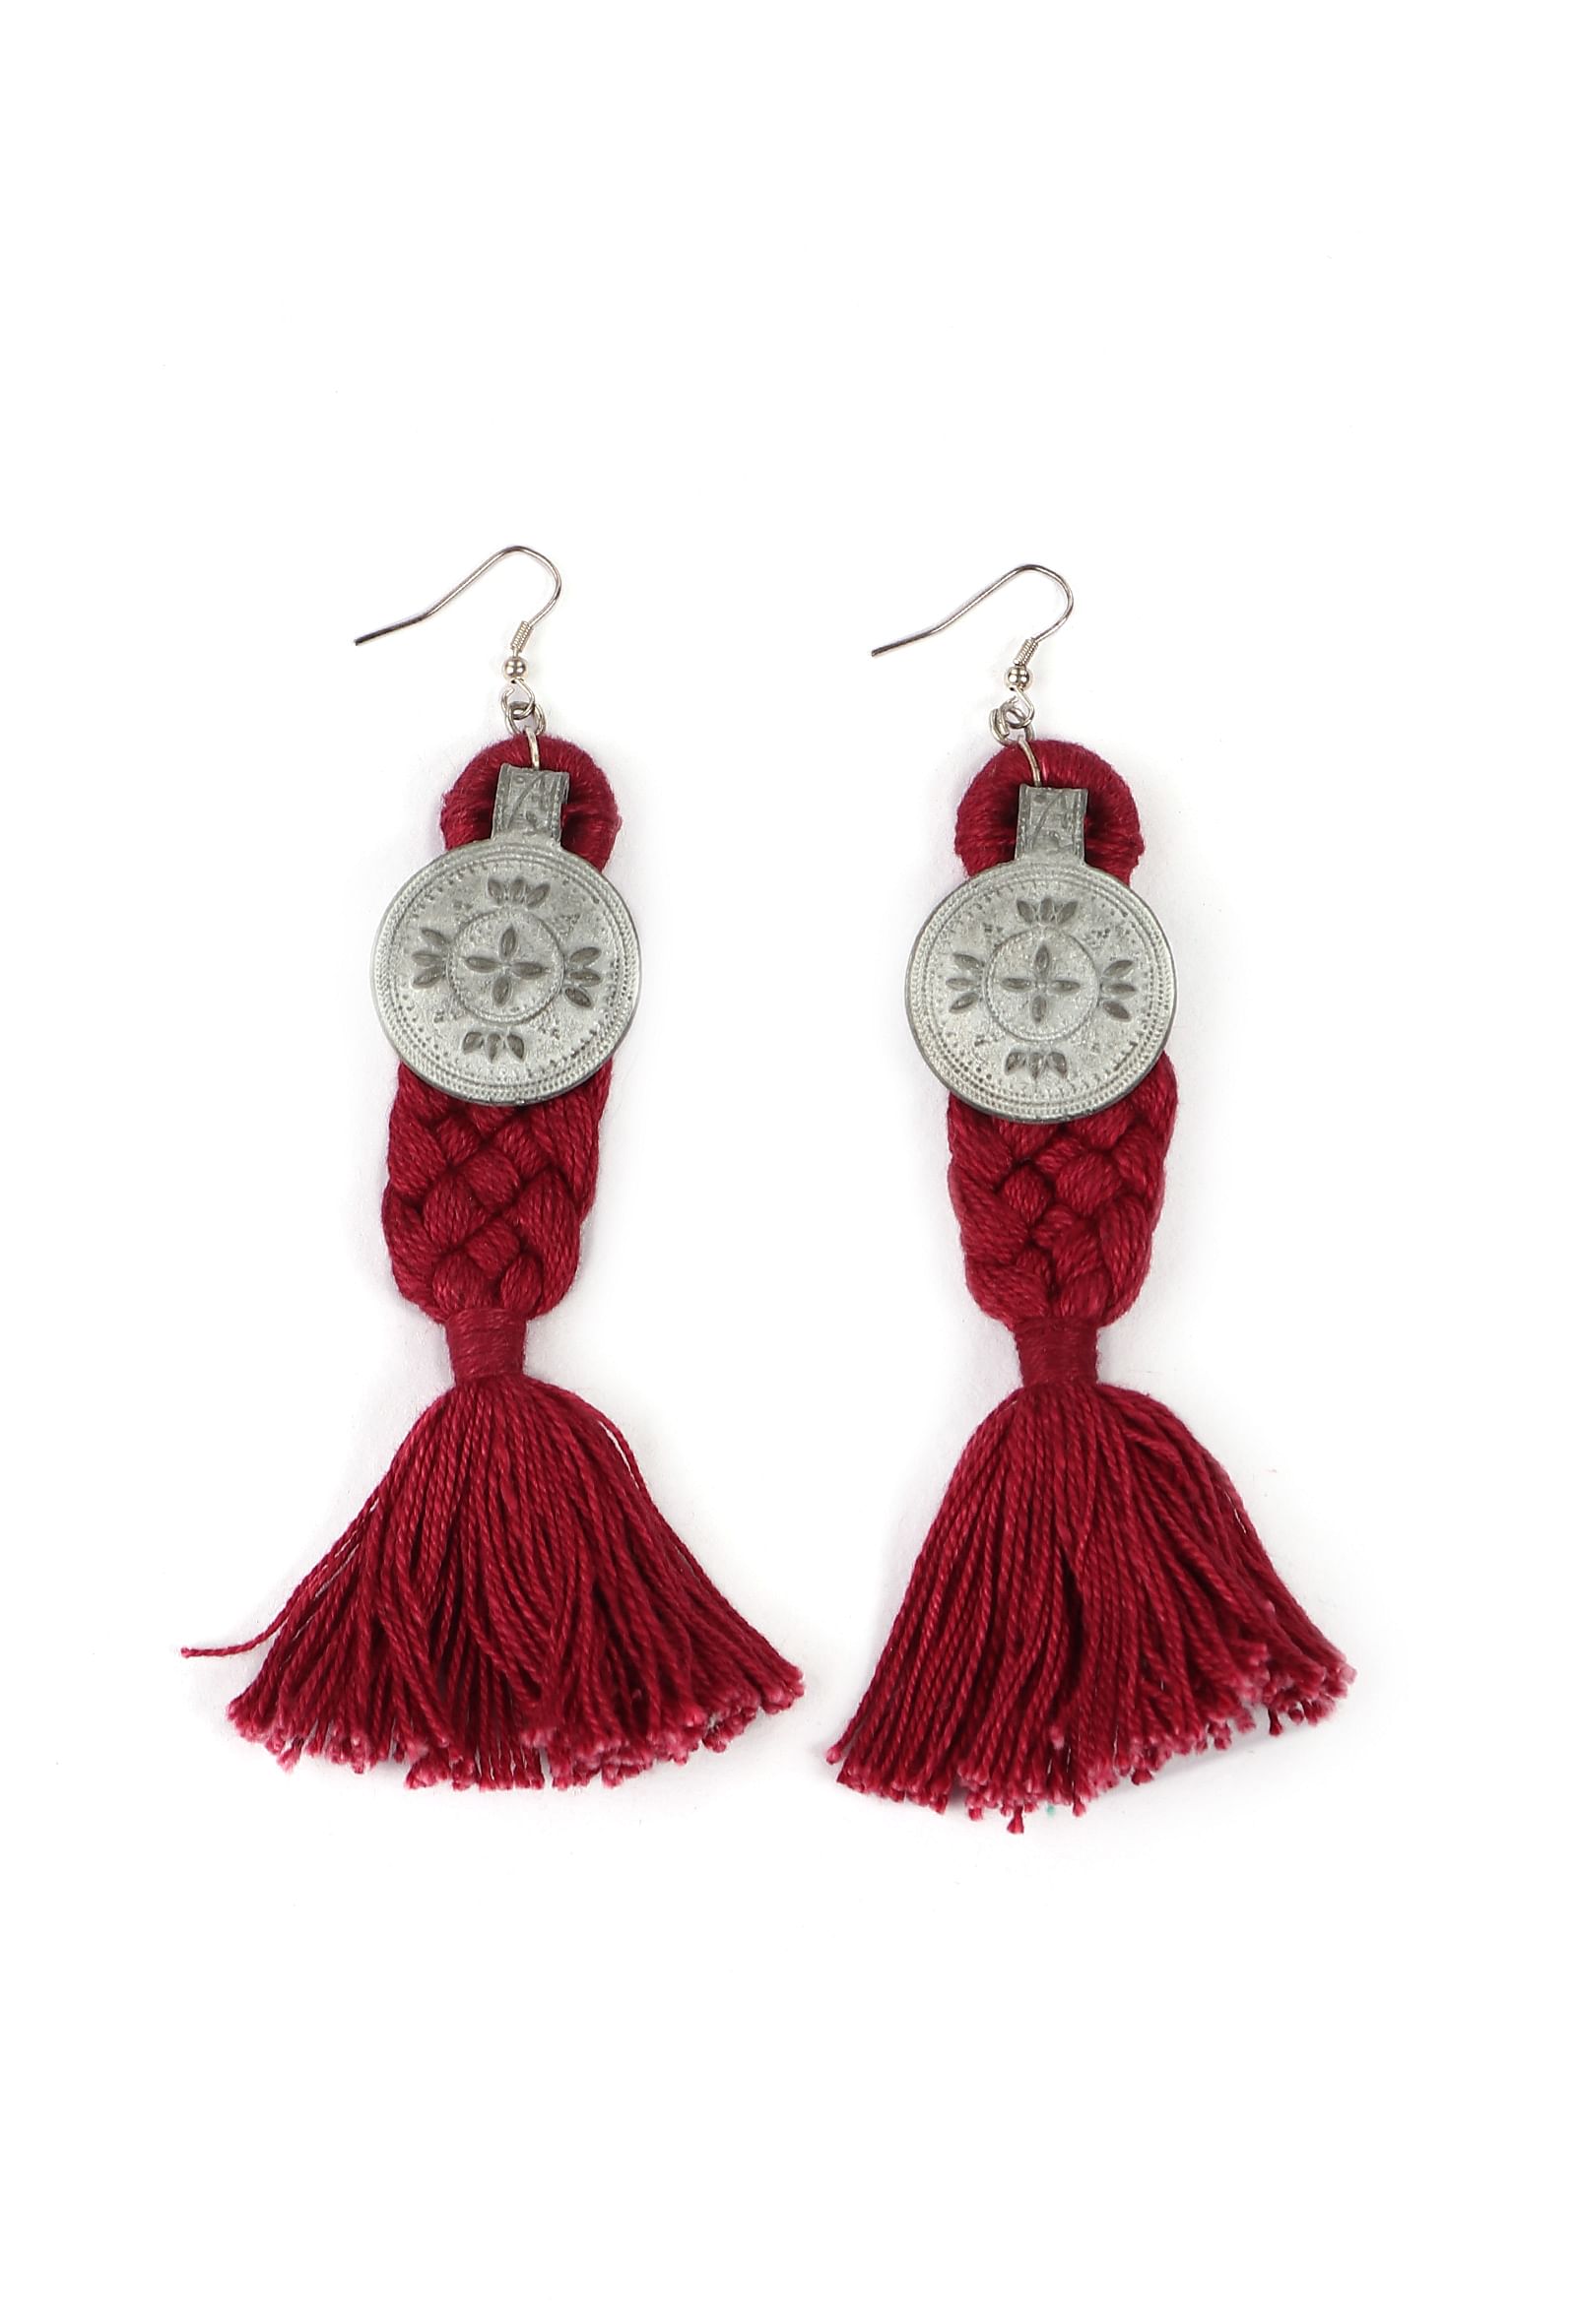 Red Thread & German Silver Tribal Earrings With Coin